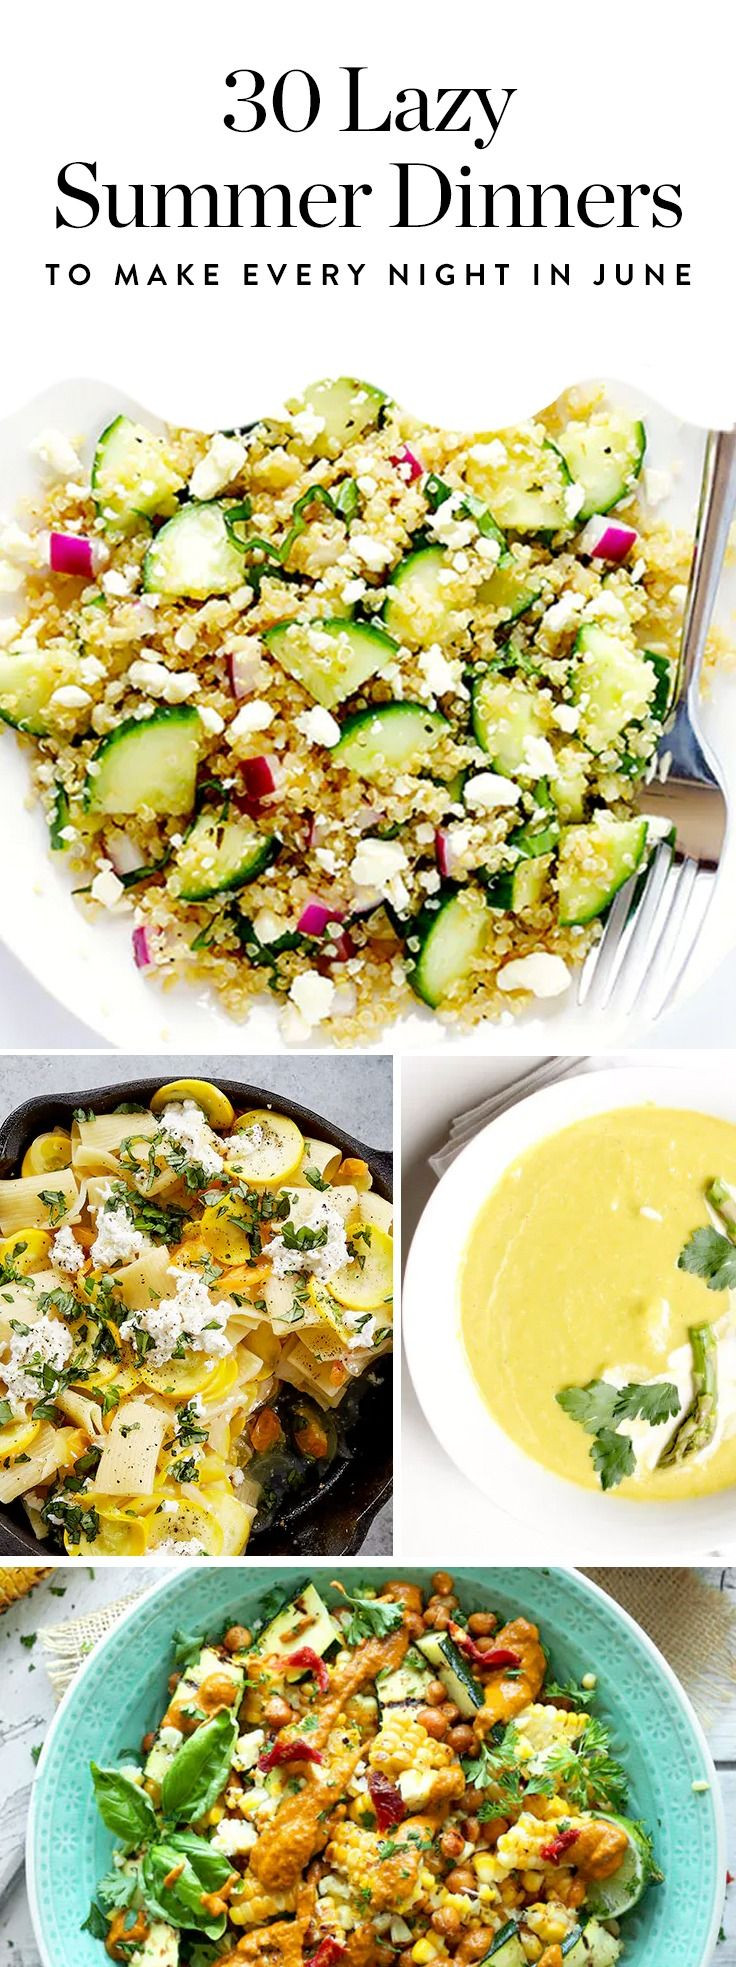 Easy Healthy Summer Dinners
 30 Lazy Summer Dinners to Make Every Night in June